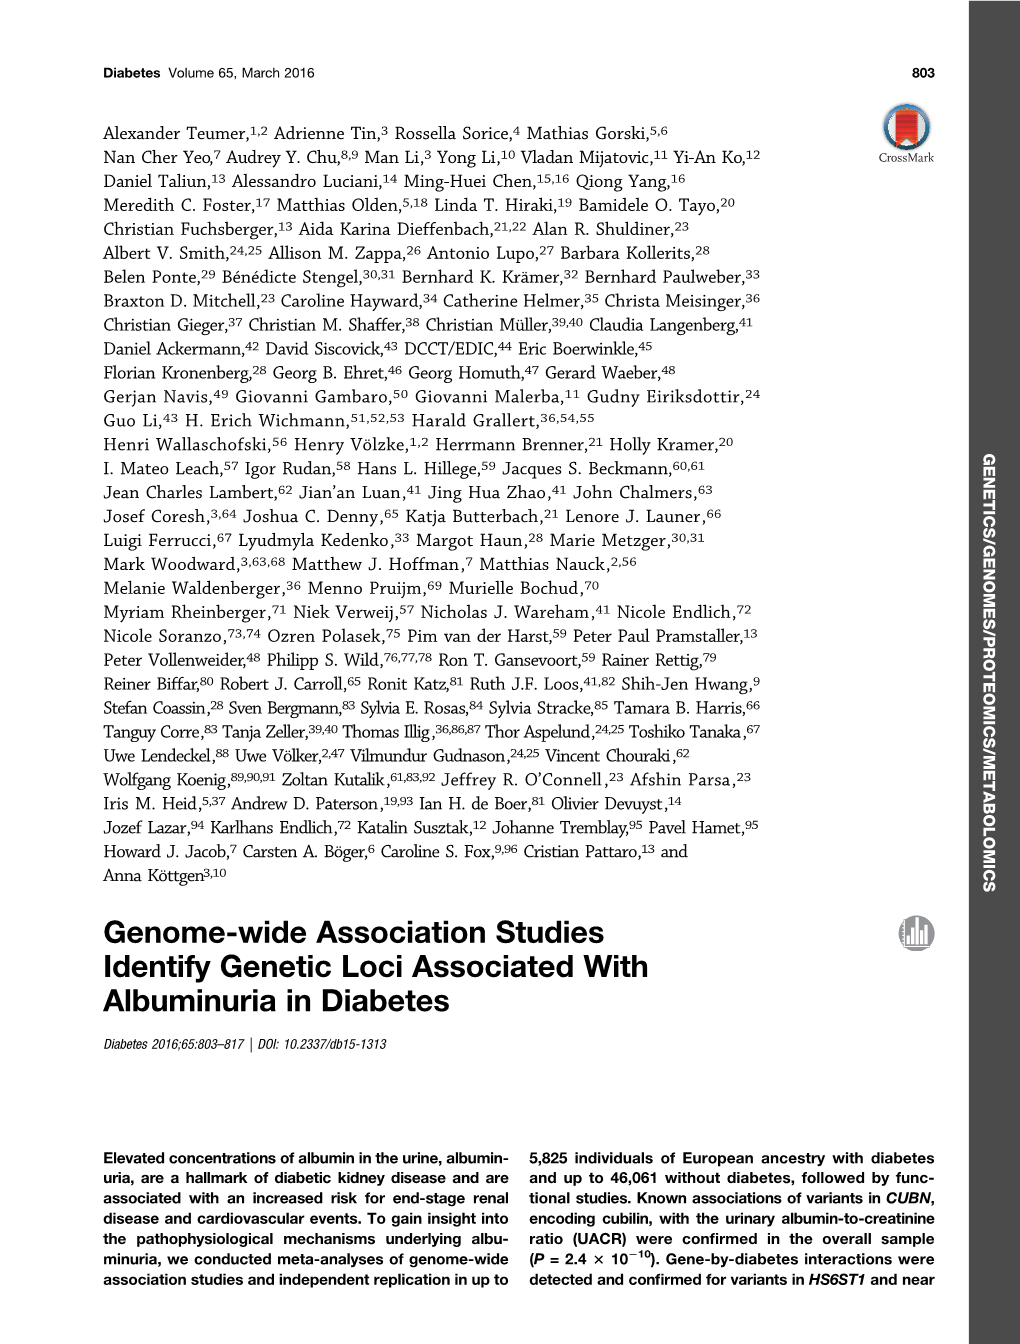 Genome-Wide Association Studies Identify Genetic Loci Associated with Albuminuria in Diabetes